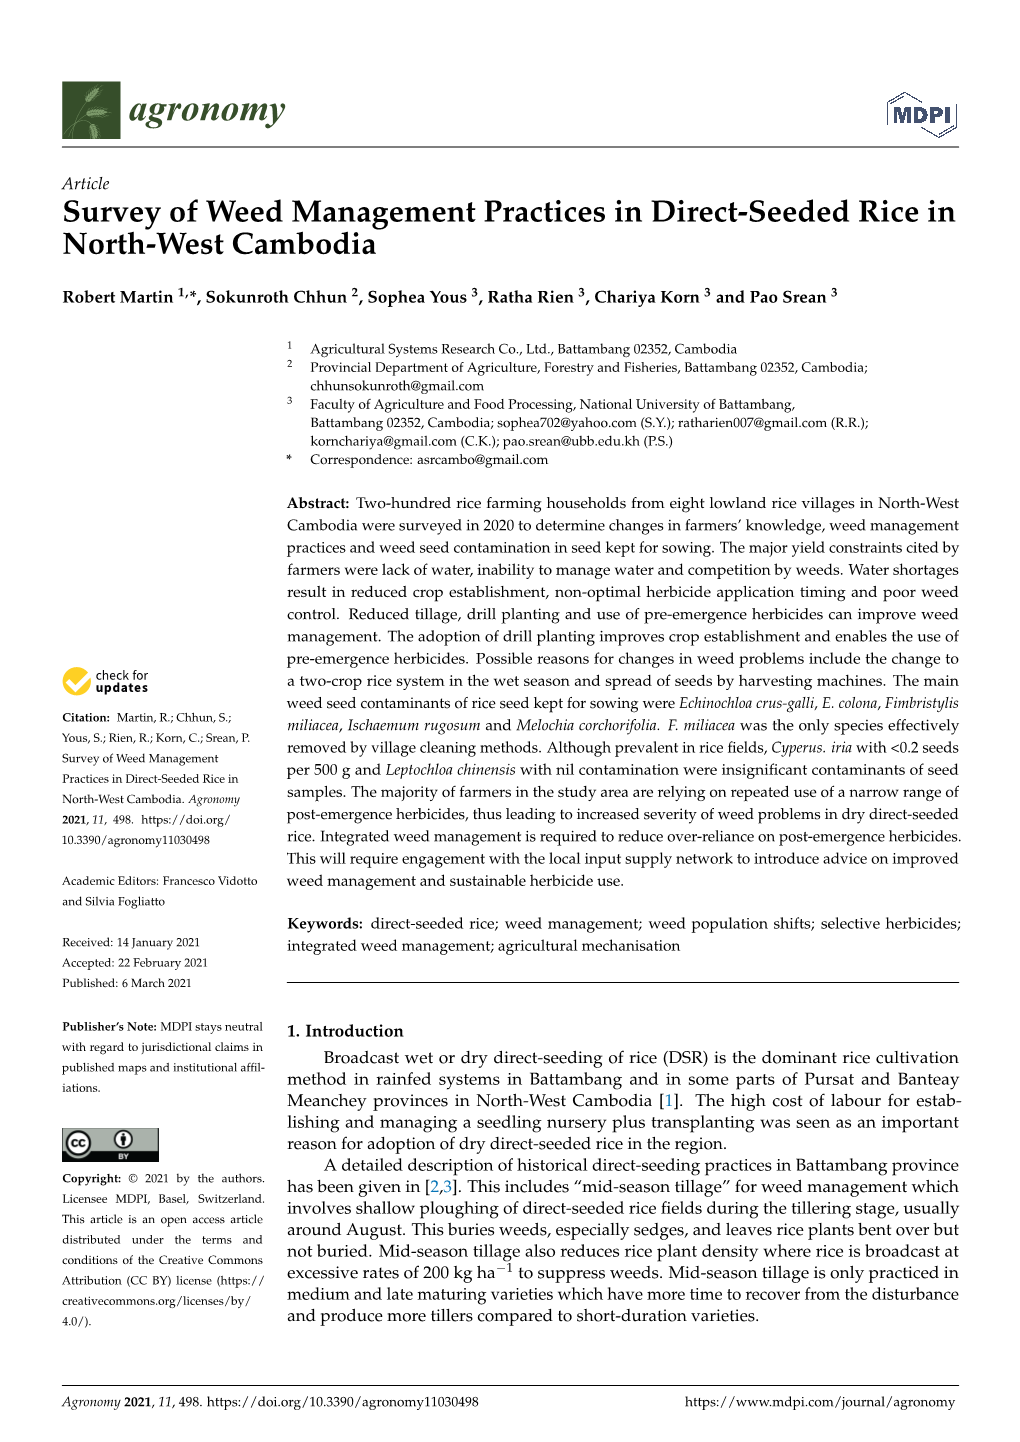 Survey of Weed Management Practices in Direct-Seeded Rice in North-West Cambodia